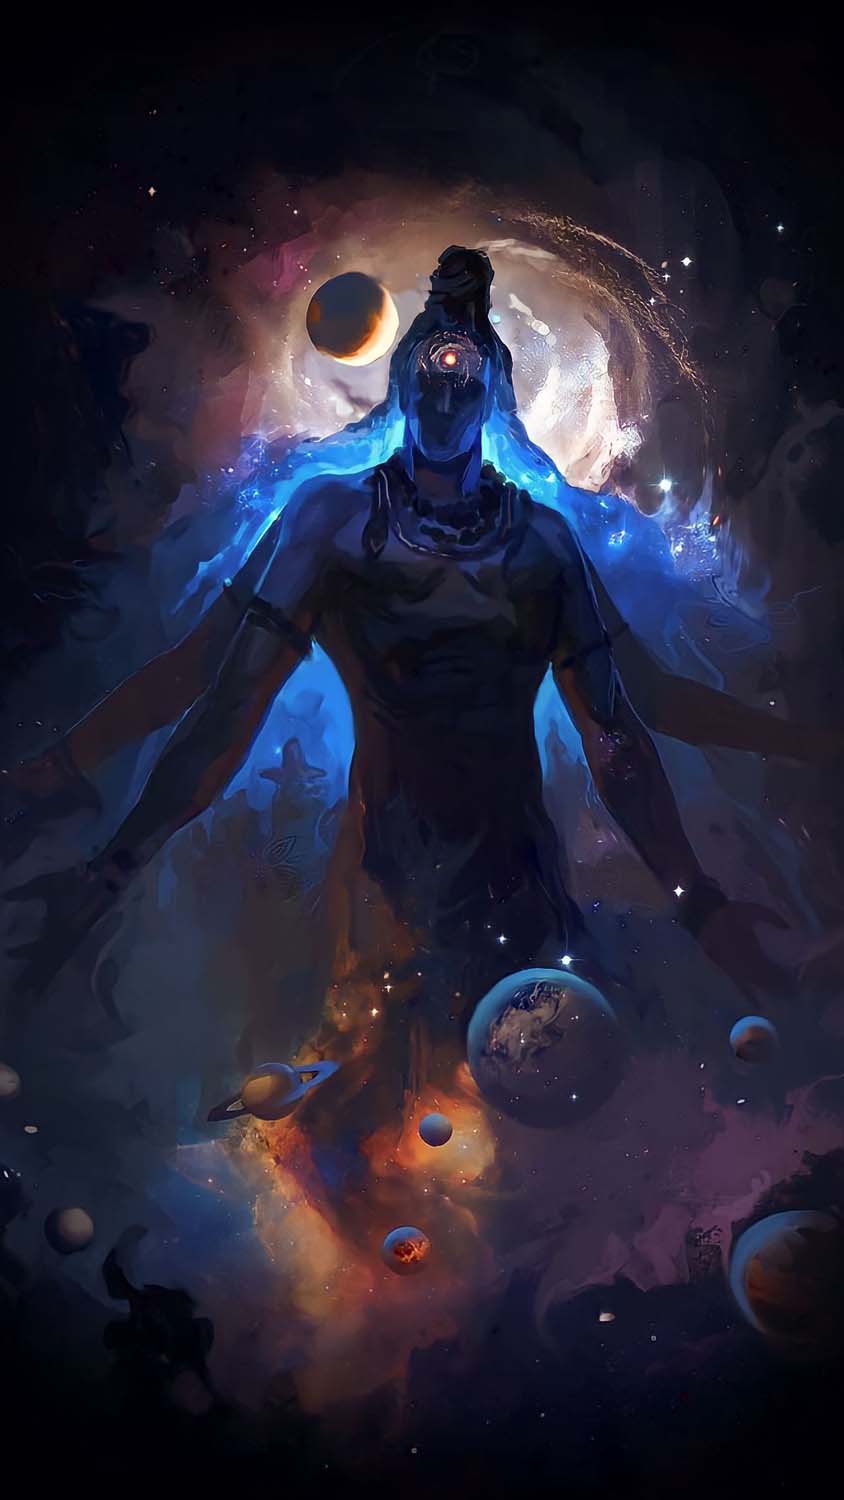 Shiva Space IPhone Wallpaper HD - IPhone Wallpapers : iPhone Wallpapers